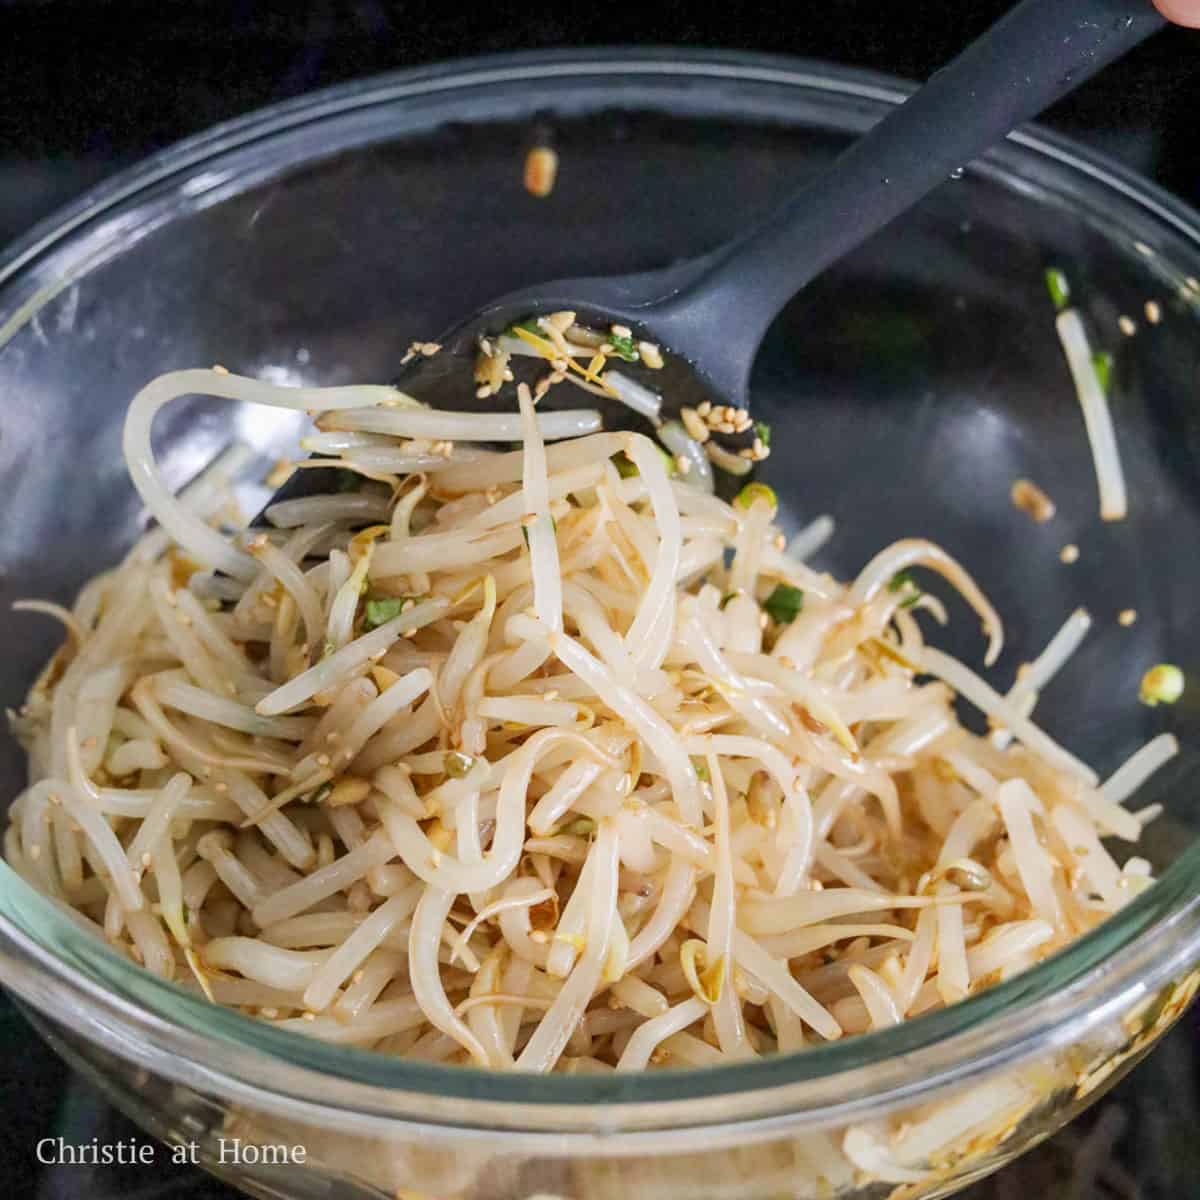 Add strained bean sprouts to large mixing bowl and mix well with sauce. Serve cold as a side dish and enjoy!